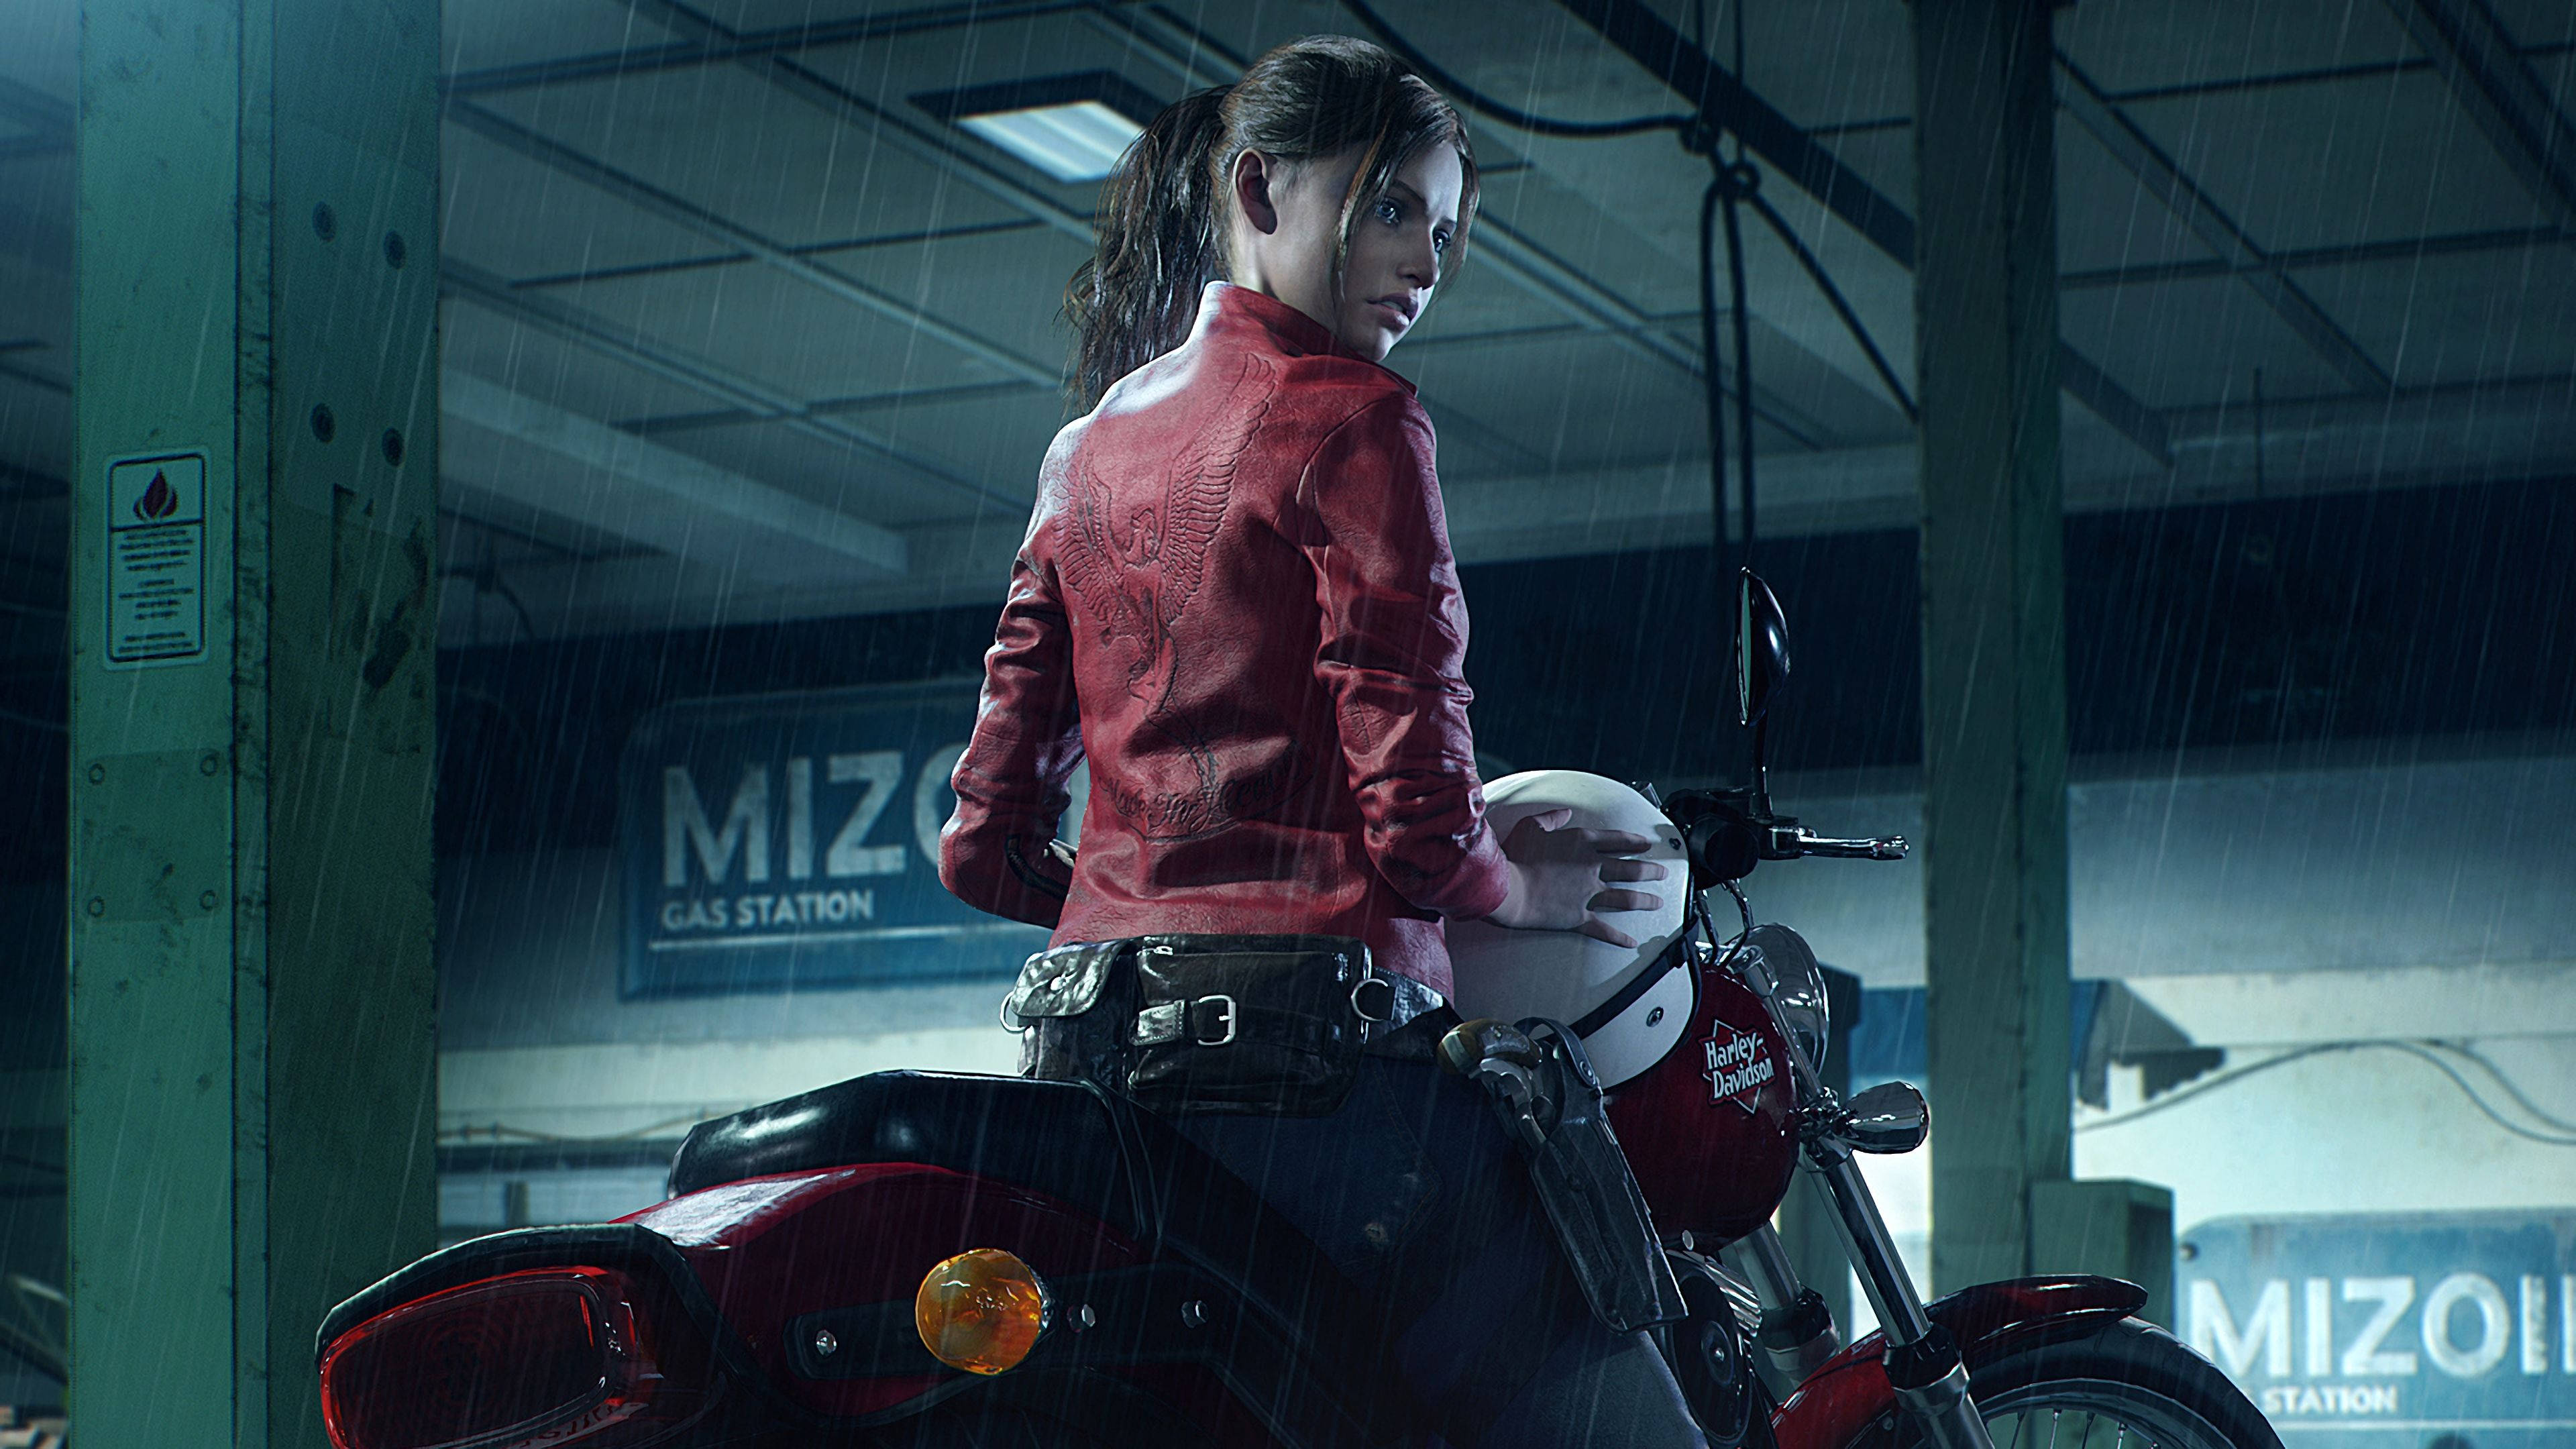 Resident Evil 2 Claire Redfield In Motorcycle Background